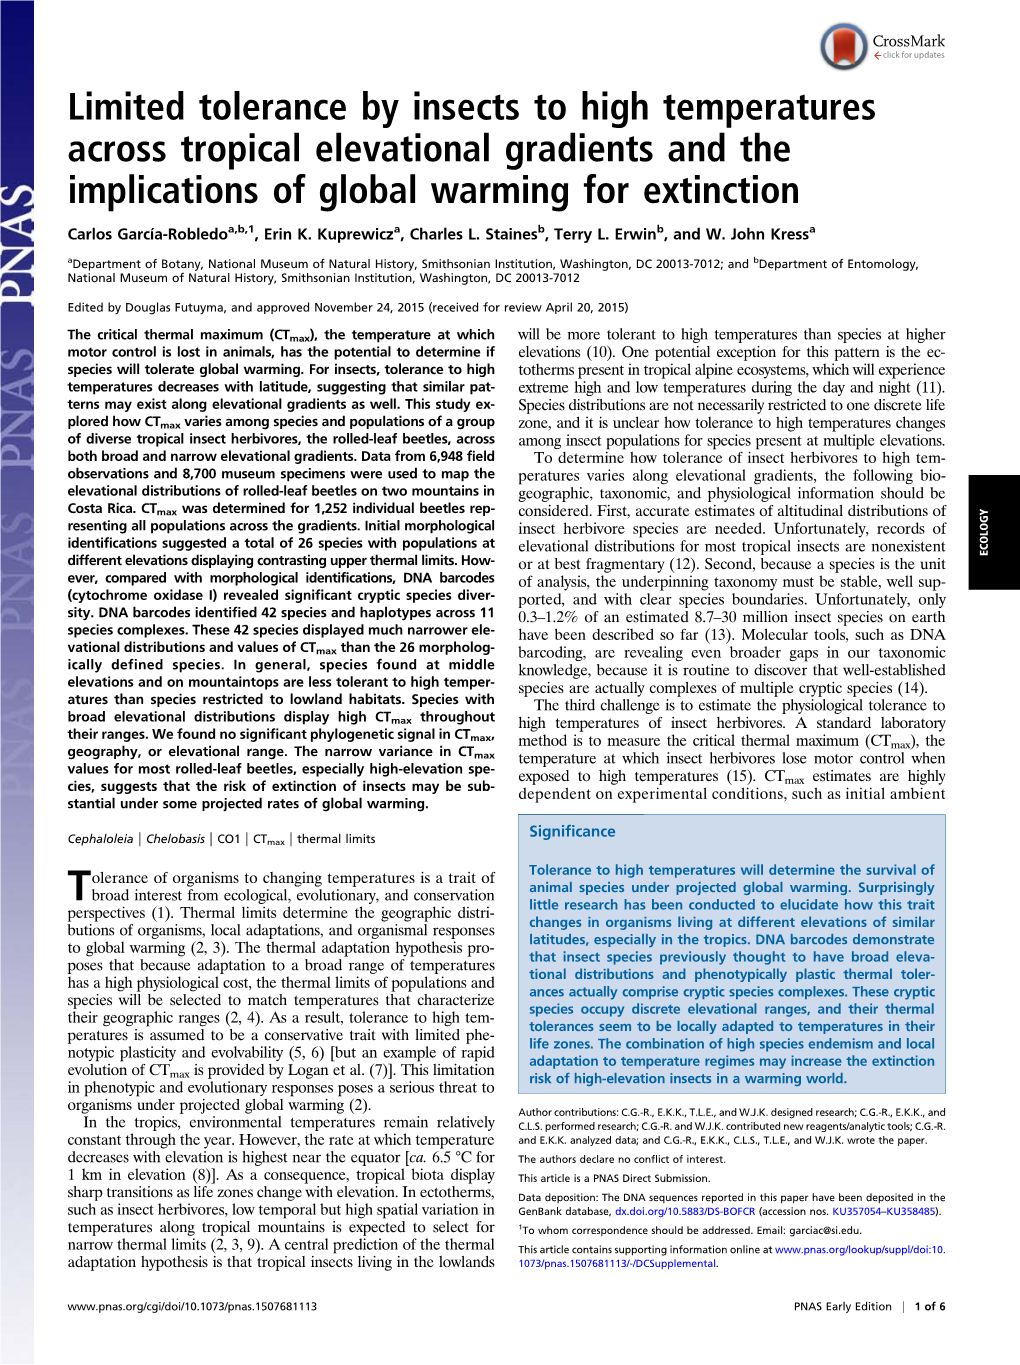 Limited Tolerance by Insects to High Temperatures Across Tropical Elevational Gradients and the Implications of Global Warming for Extinction